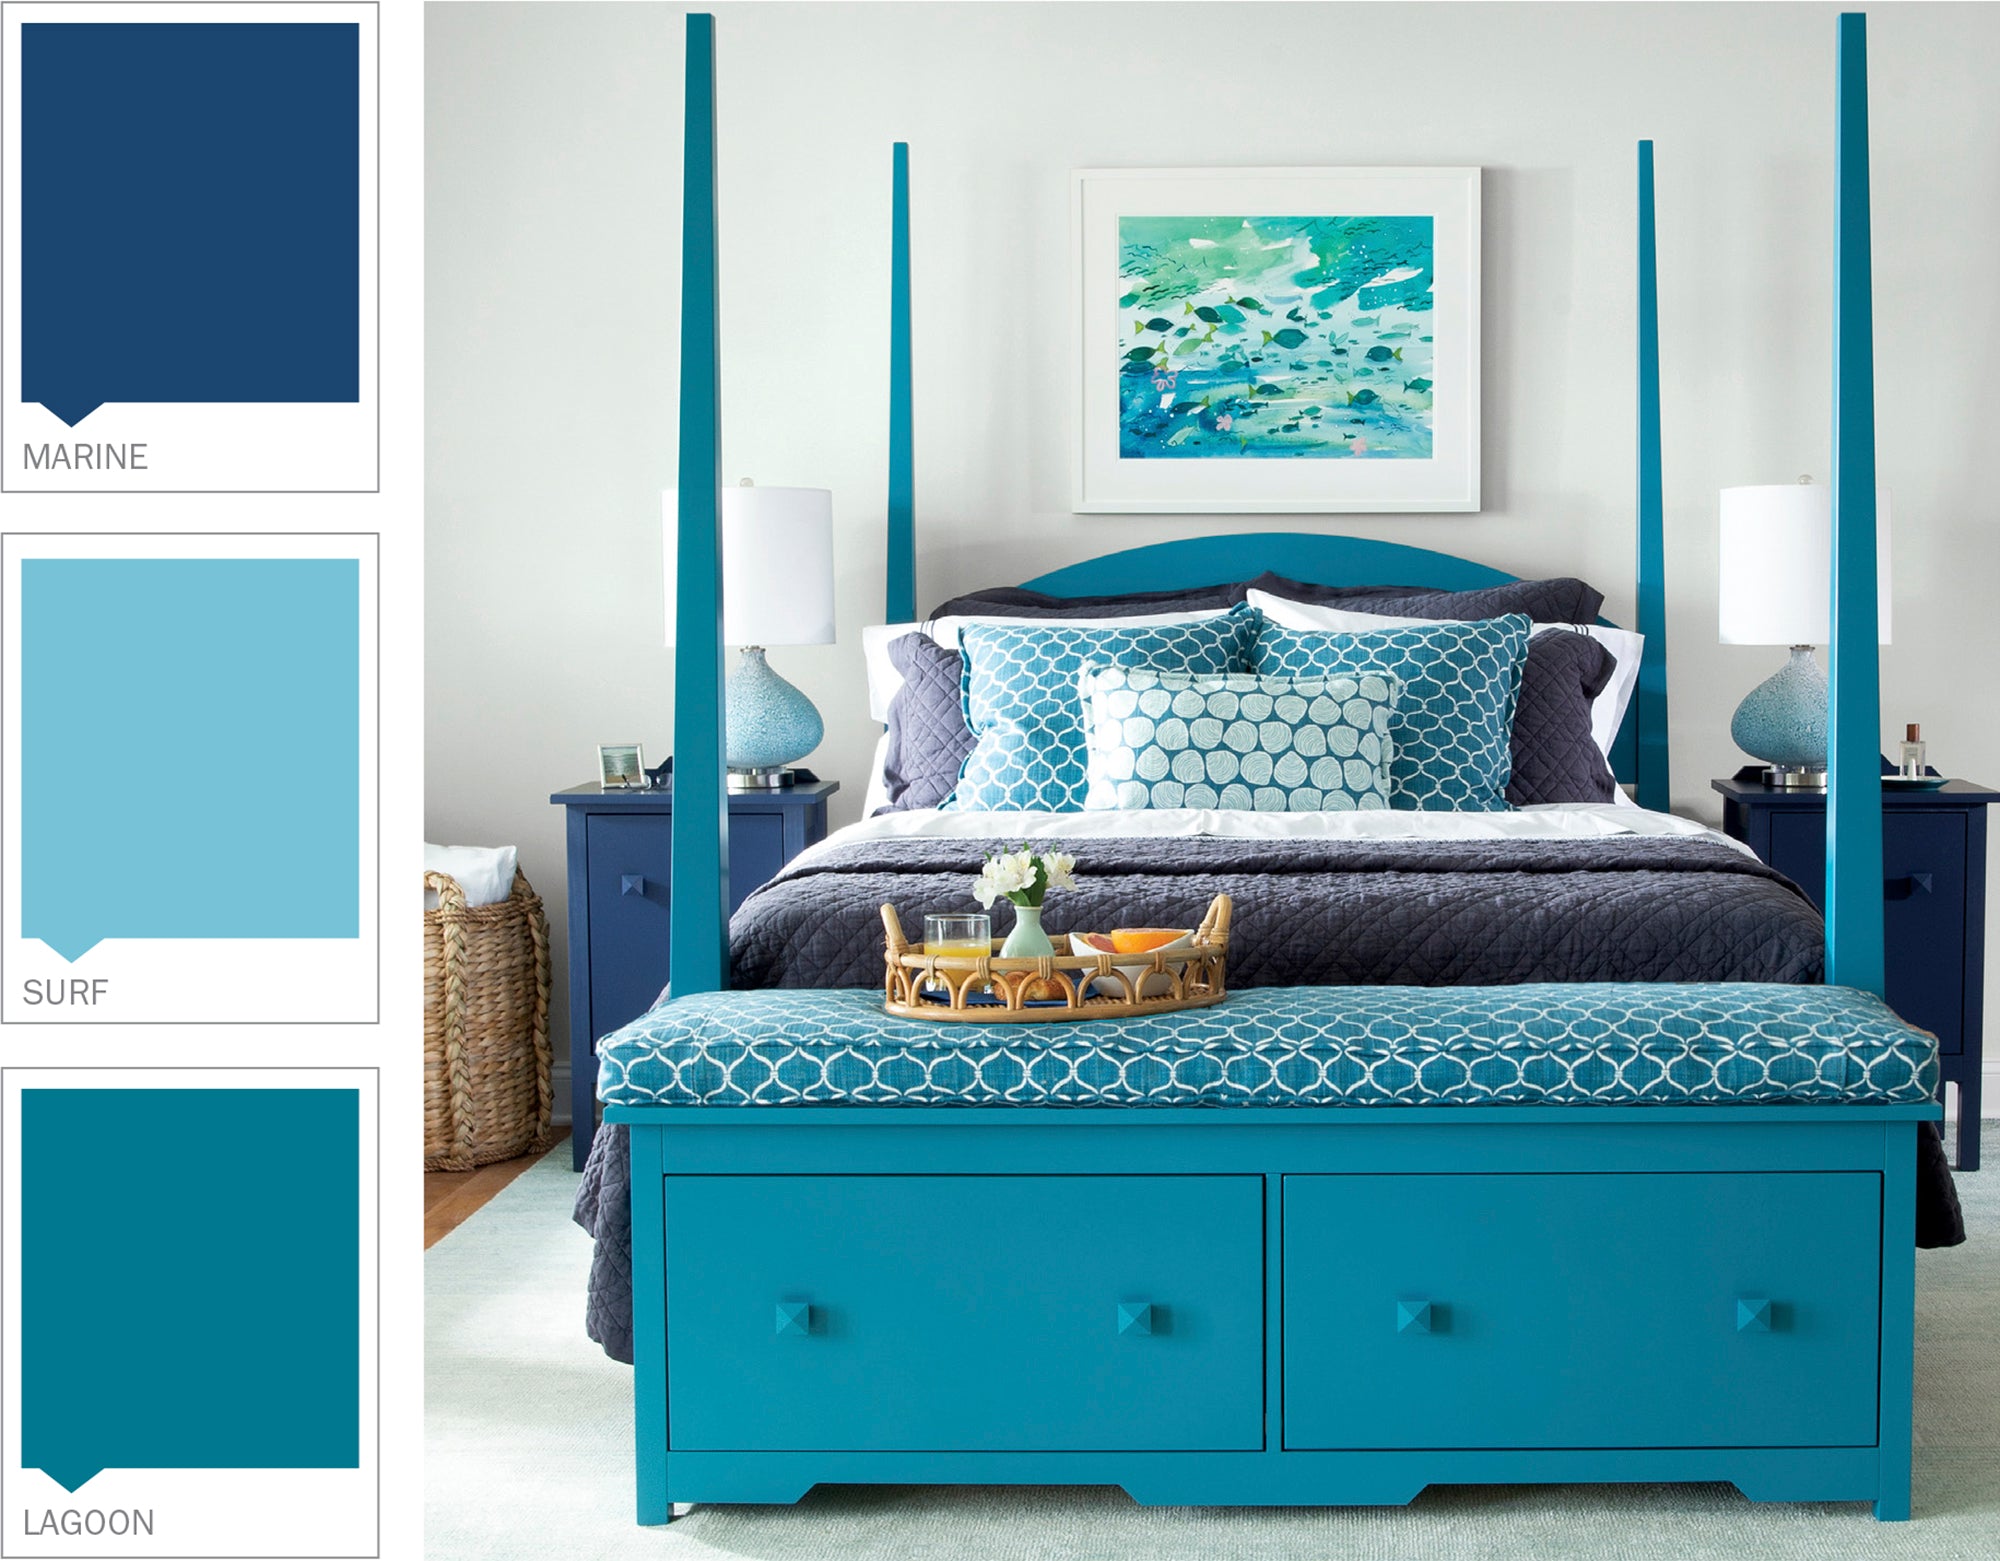 Swatches in Marine, Surf, Lagoon, wood window seat, poster bed, bedside tables, lamps, woven rug, Artwork: Under the Sea